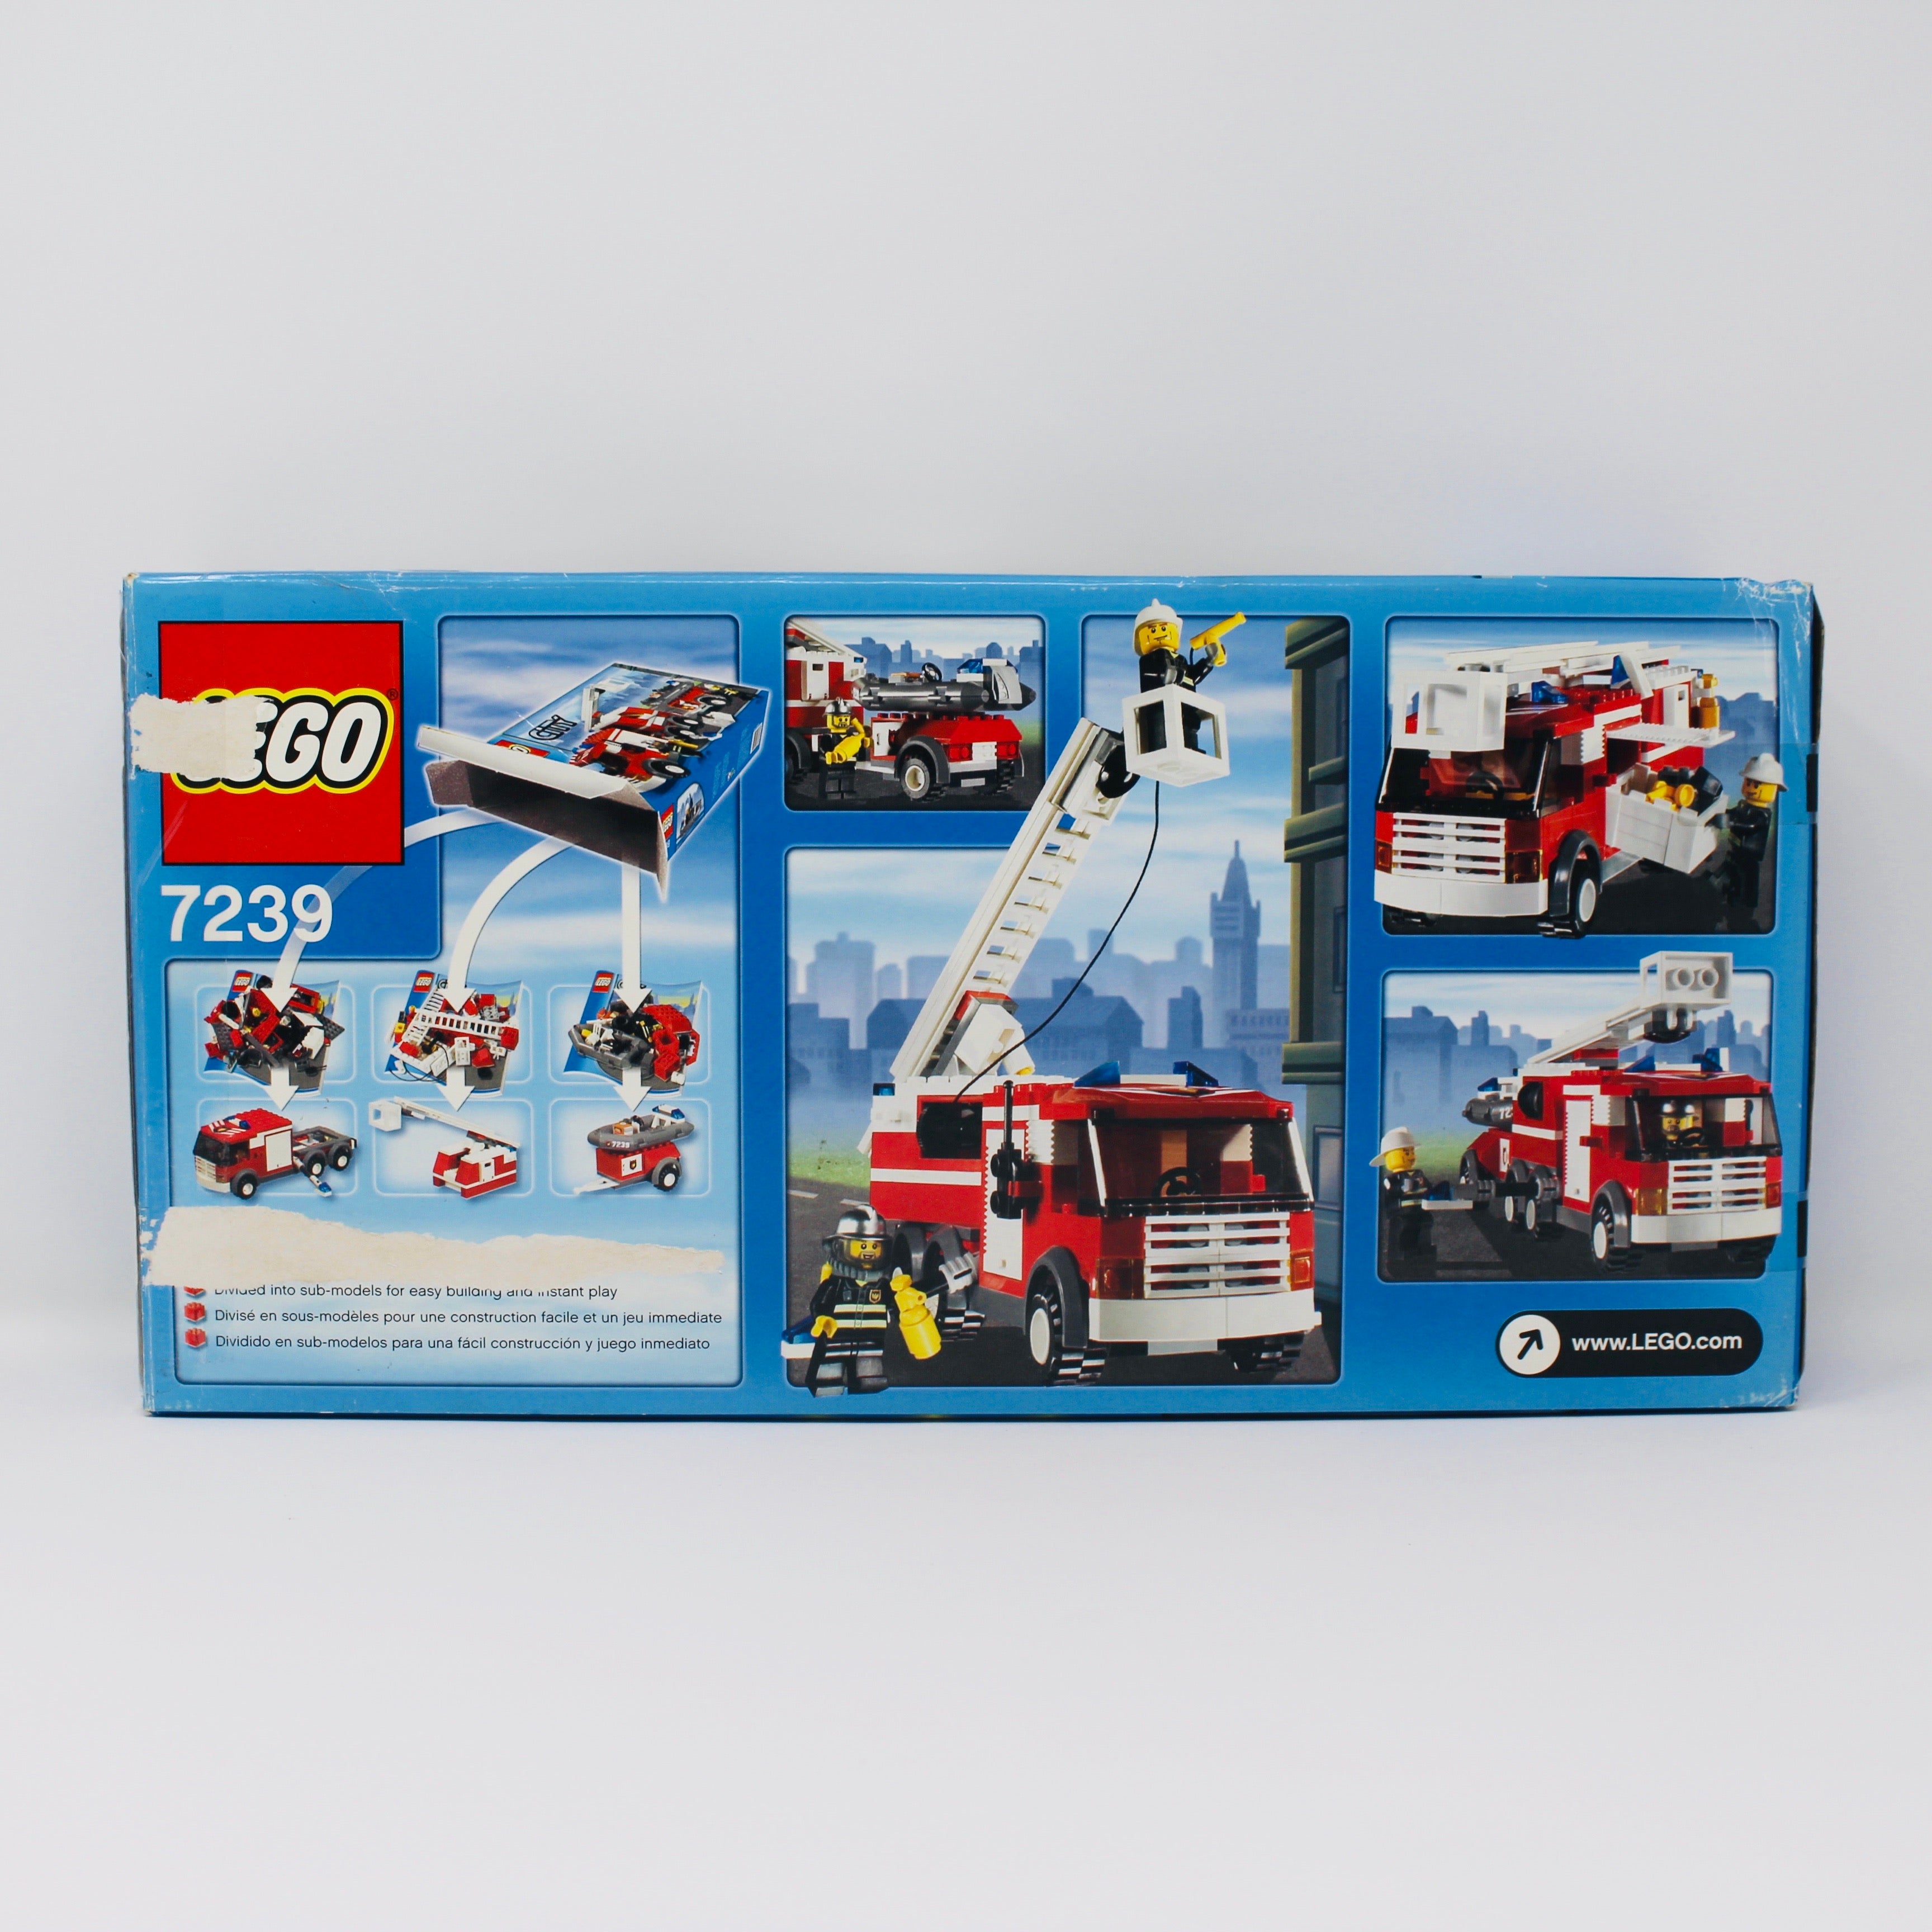 Certified Used Set 7239 City Fire Truck